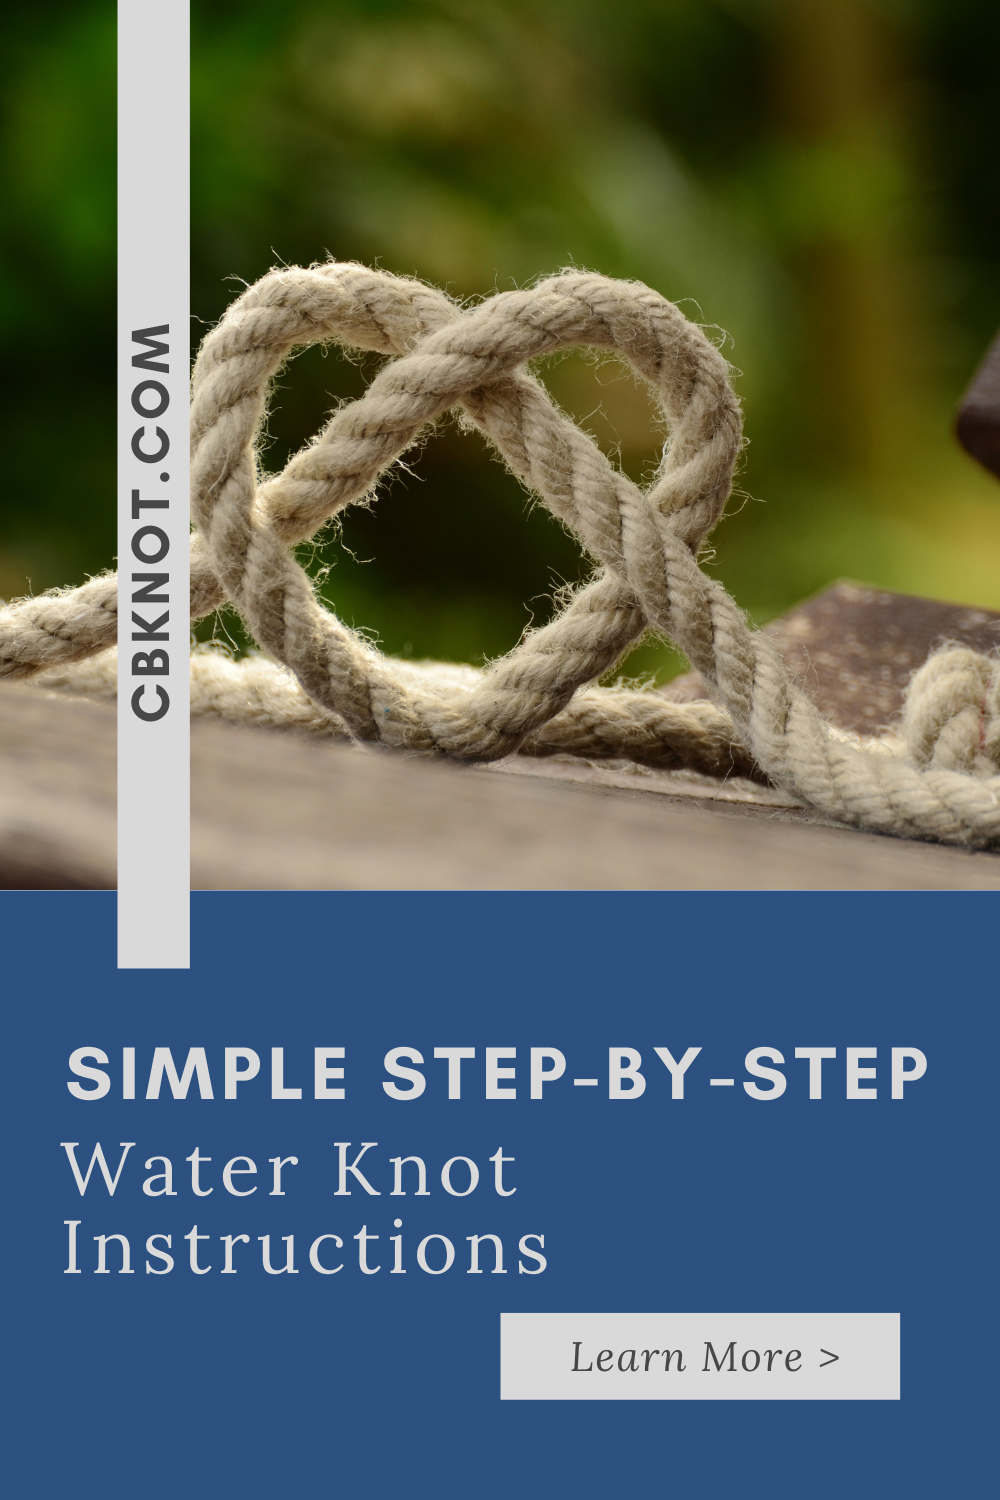 Simple Step-By-Step Water Knot Instructions - CBKNOT